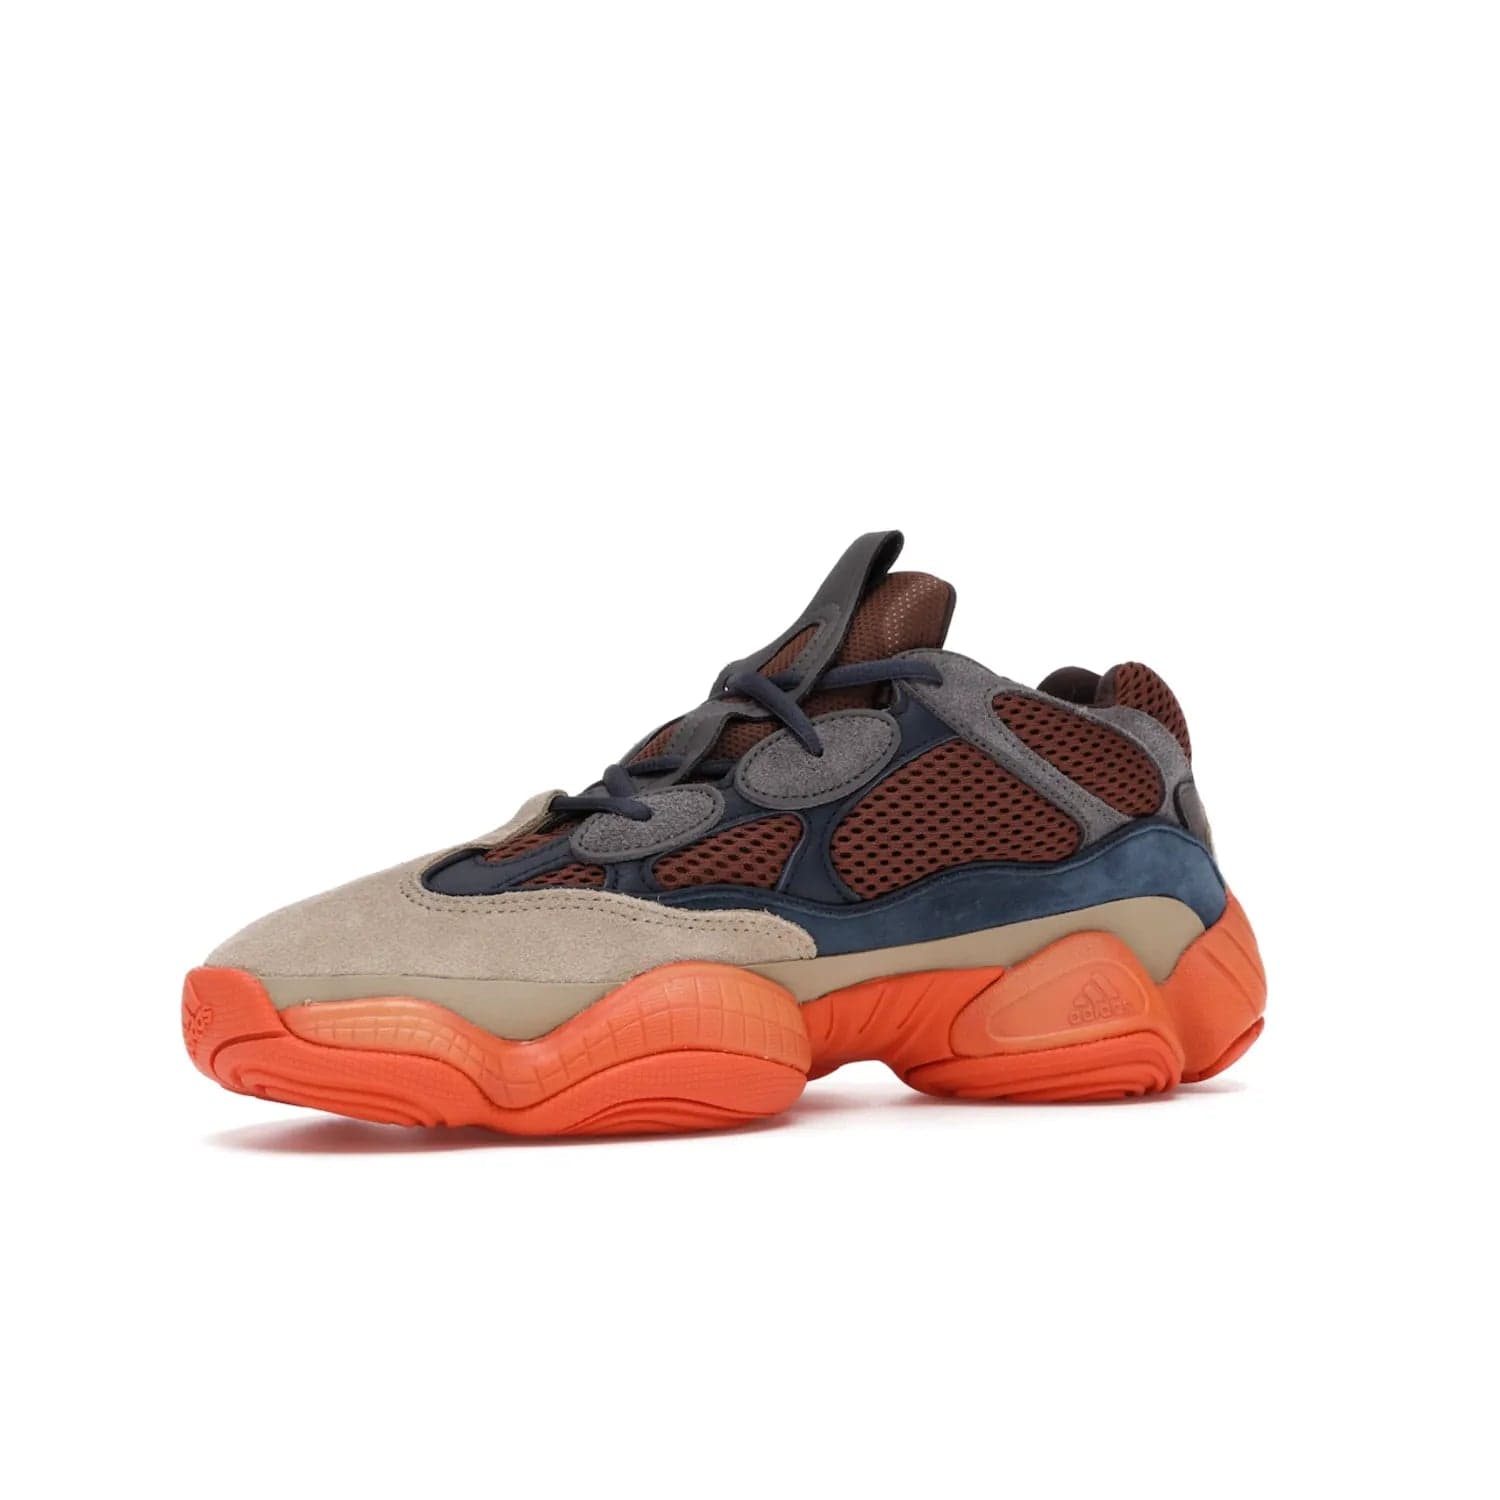 adidas Yeezy 500 Enflame - Image 16 - Only at www.BallersClubKickz.com - Step into style with the adidas Yeezy 500 Enflame. Mix of mesh, leather, and suede layered together to create tonal-brown, dark blue, & orange. Orange AdiPRENE sole provides superior cushioning & comfort. Get yours and experience maximum style.